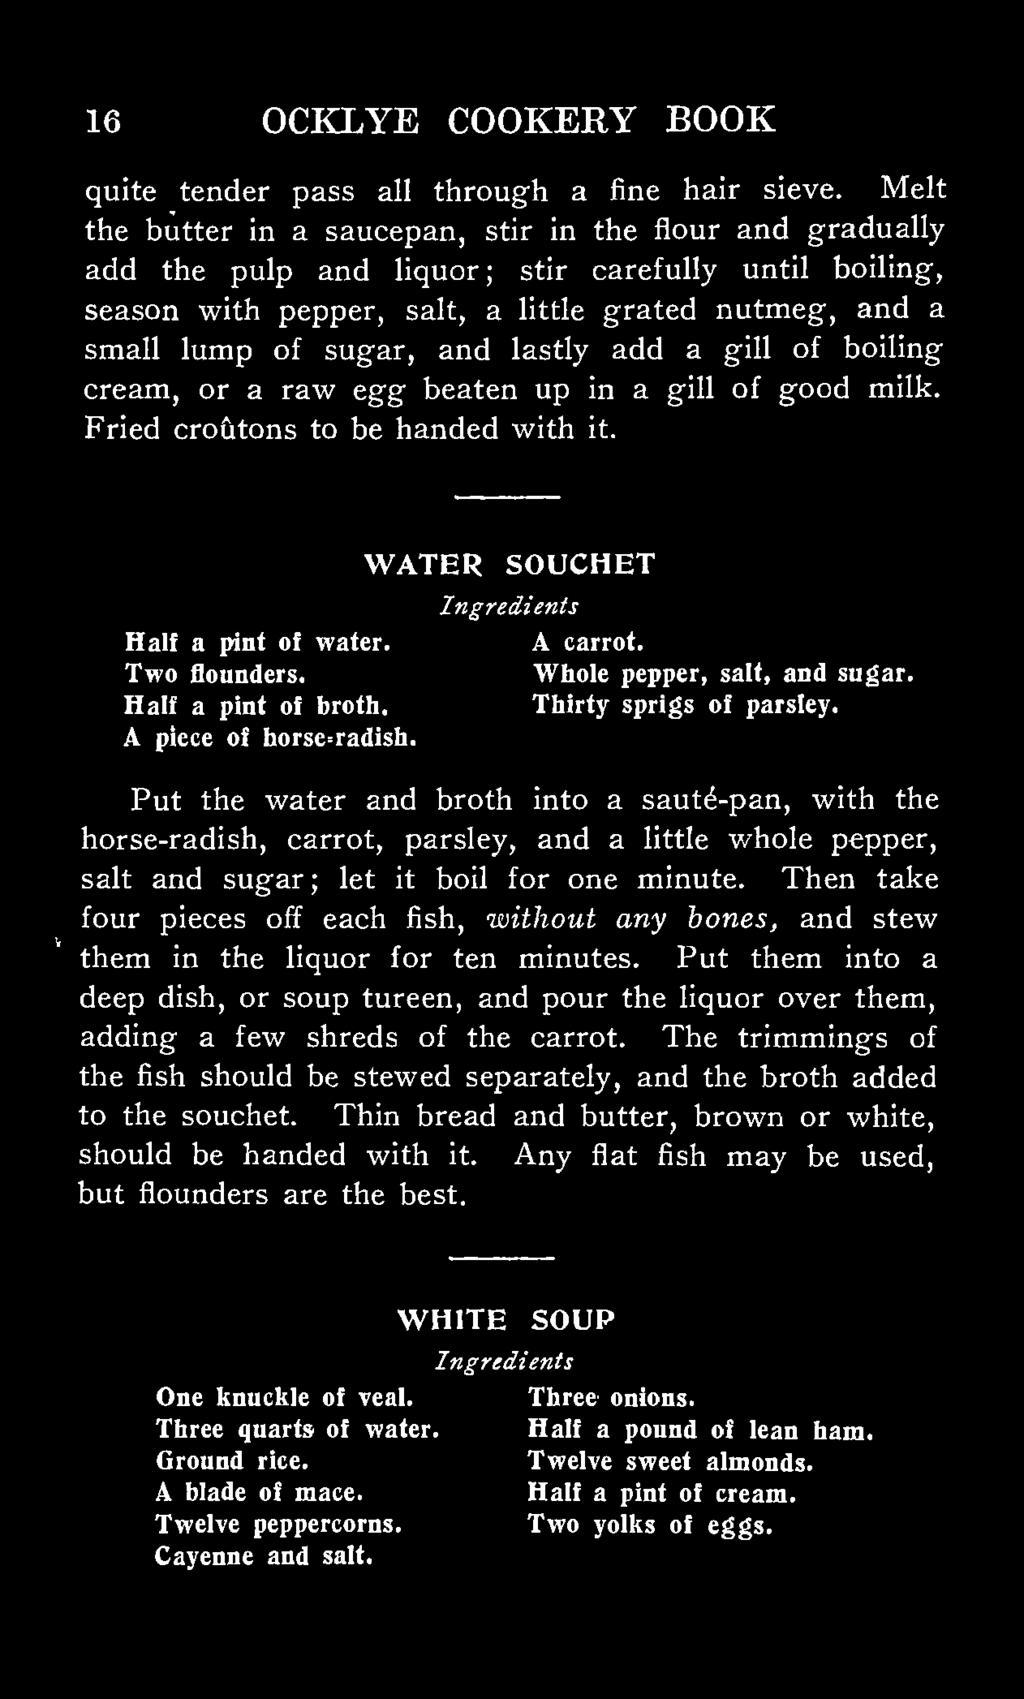 lastly add a gill of boiling cream, or a raw egg beaten up in a gill of good milk. Fried croiitons to be handed with it. WATER SOUCHET Half a pint of water. A carrot. Two flounders.